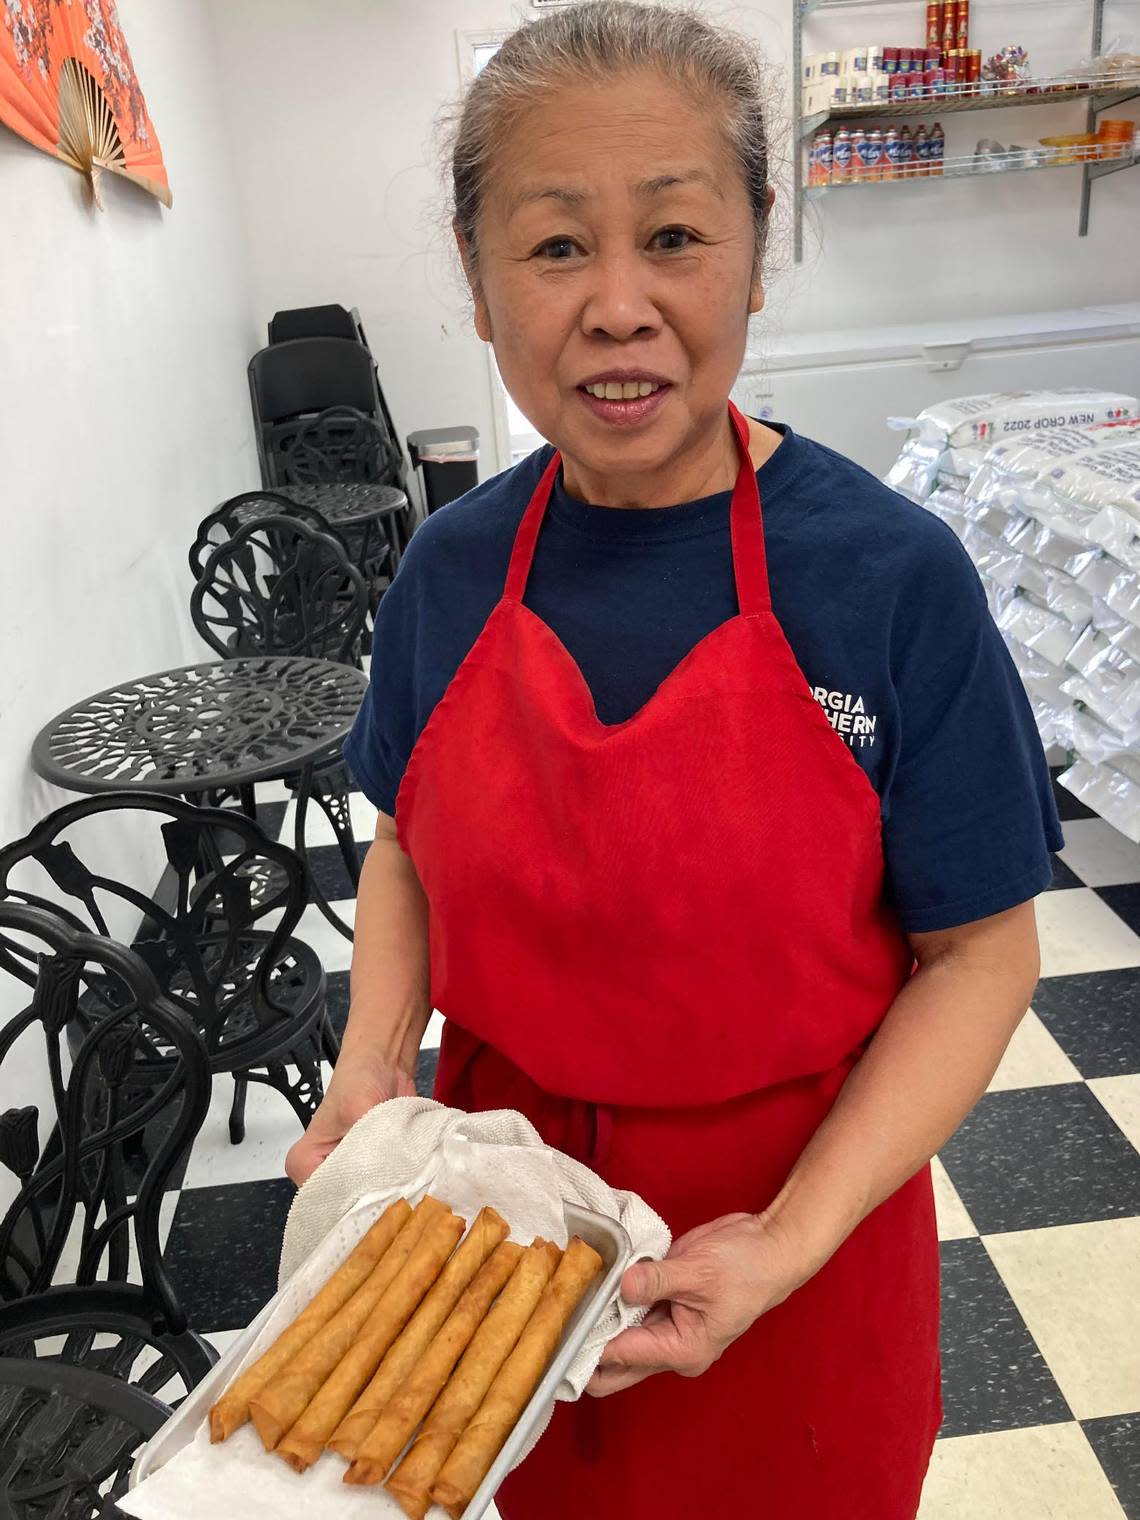 Delia Tropel with a pan of piping-hot lumpia at Lor’s Philippine Cuisine.